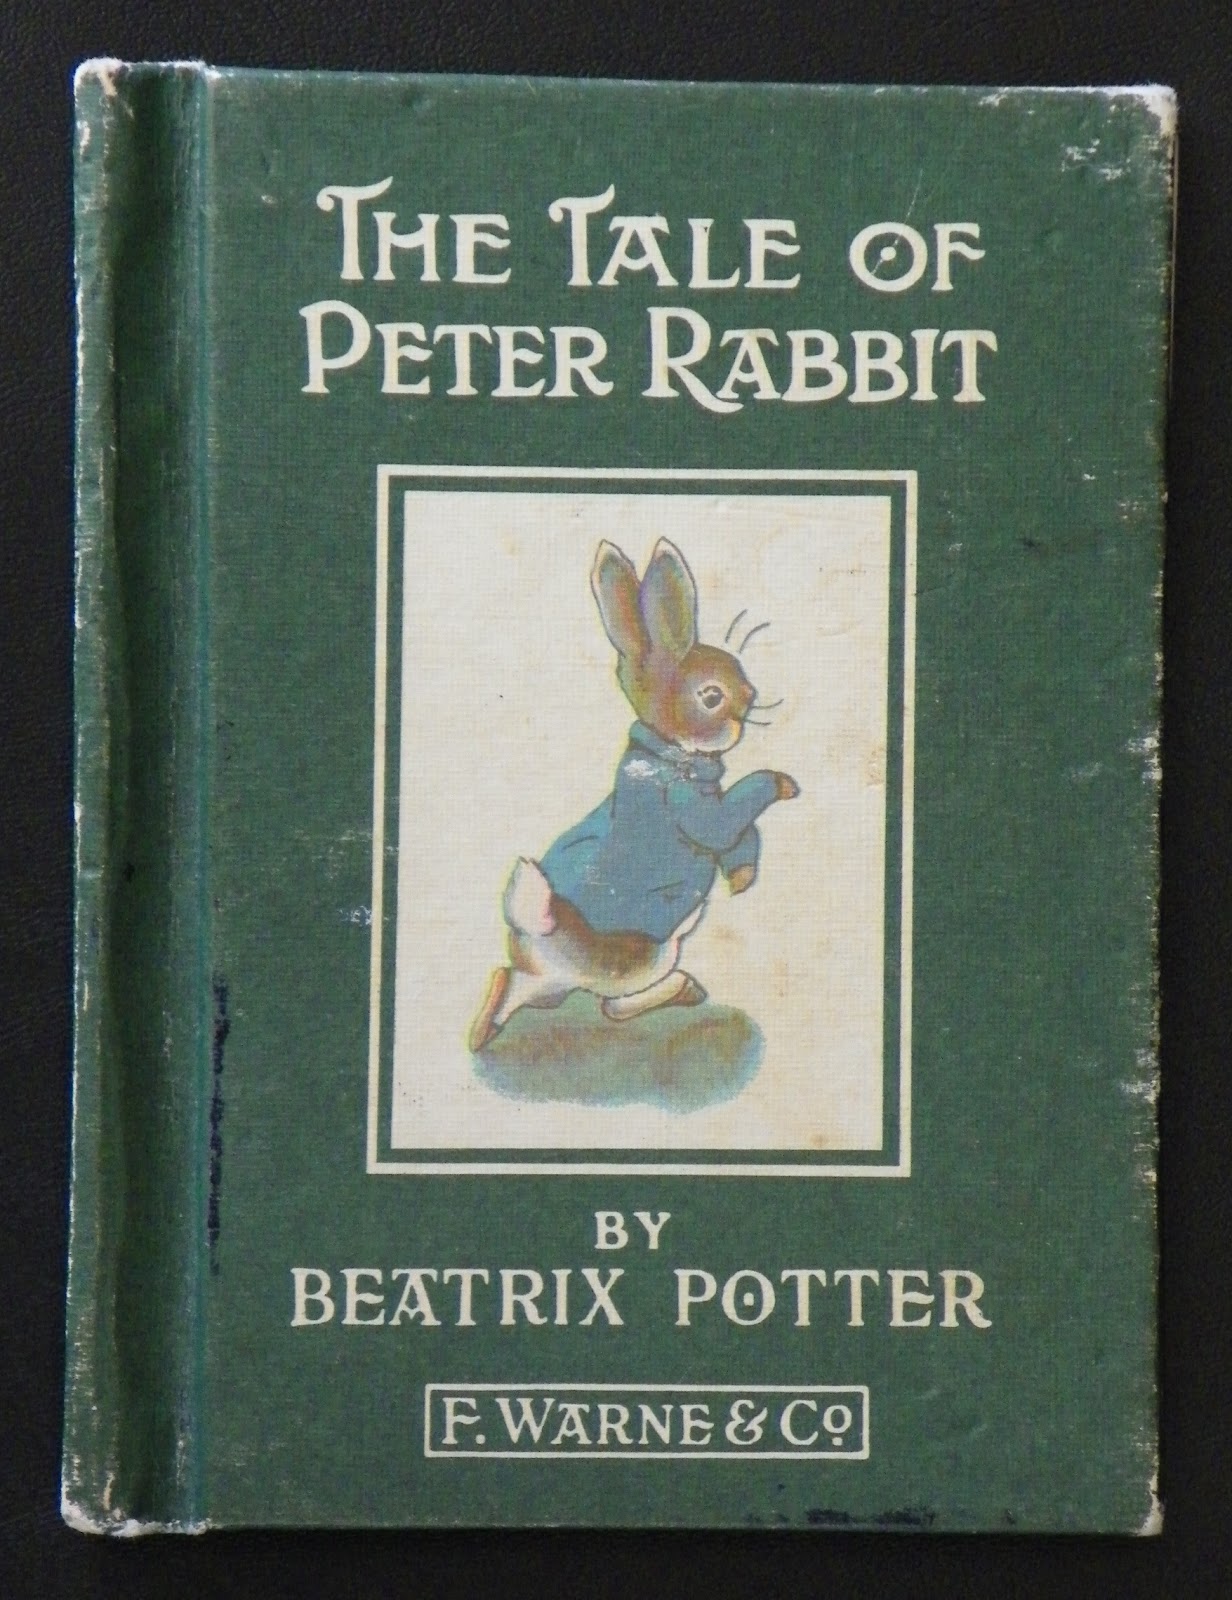 The Tale of Peter Rabbit - Wikipedia